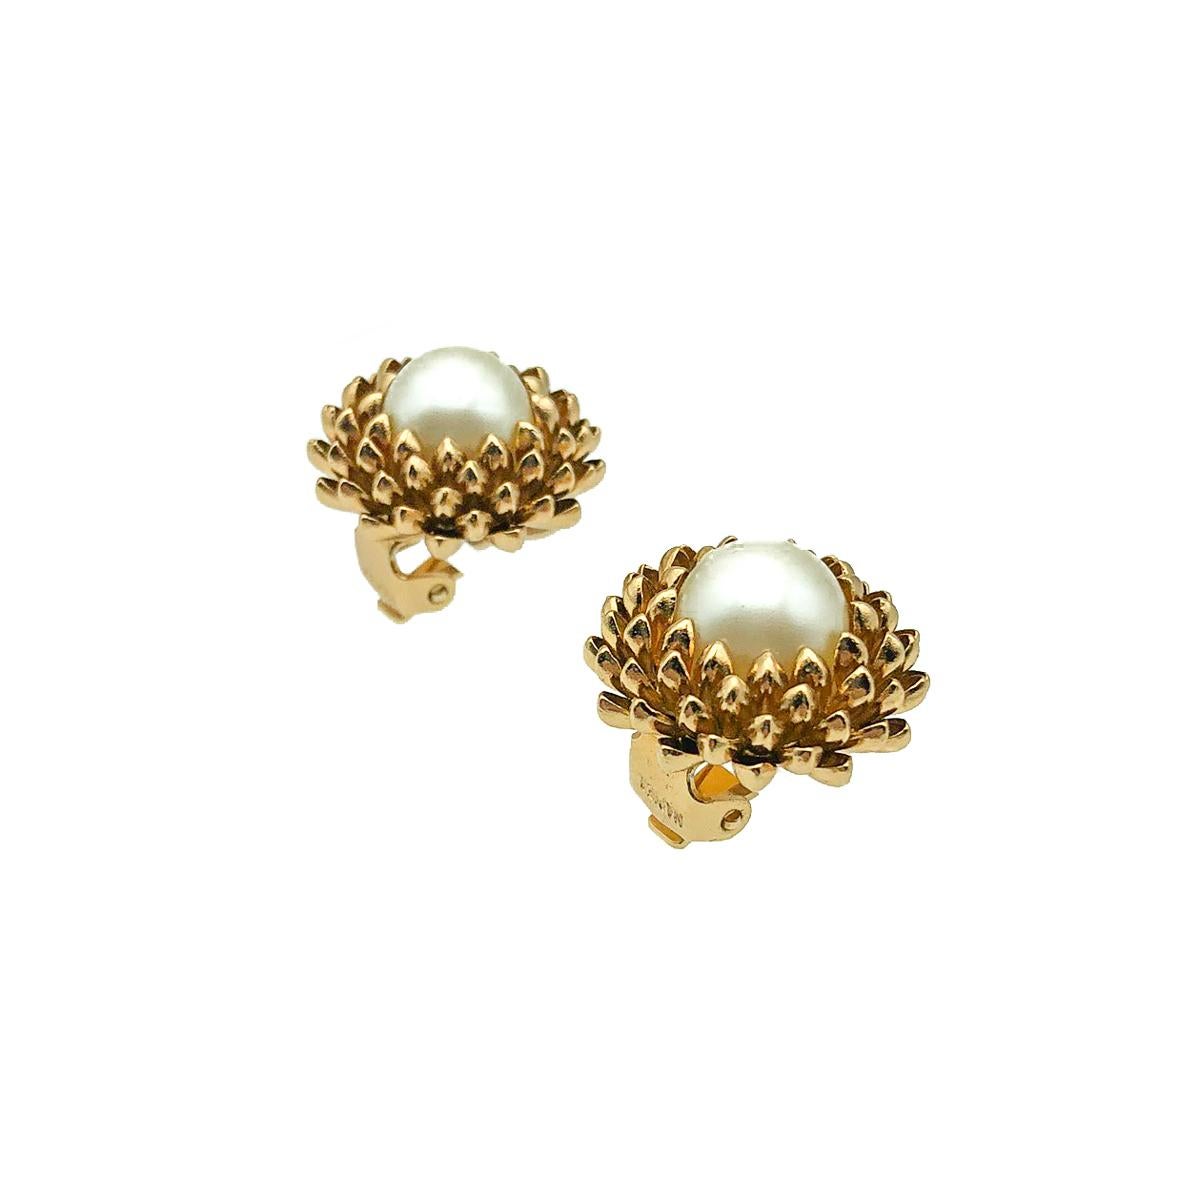 A timeless and very alluring pair of Vintage Napier Earrings. Crafted in gold plated metal and set with a faux pearl. In very good vintage condition. Signed. 2cms. A perfect go to clip on earring from the timeless style house of Napier.